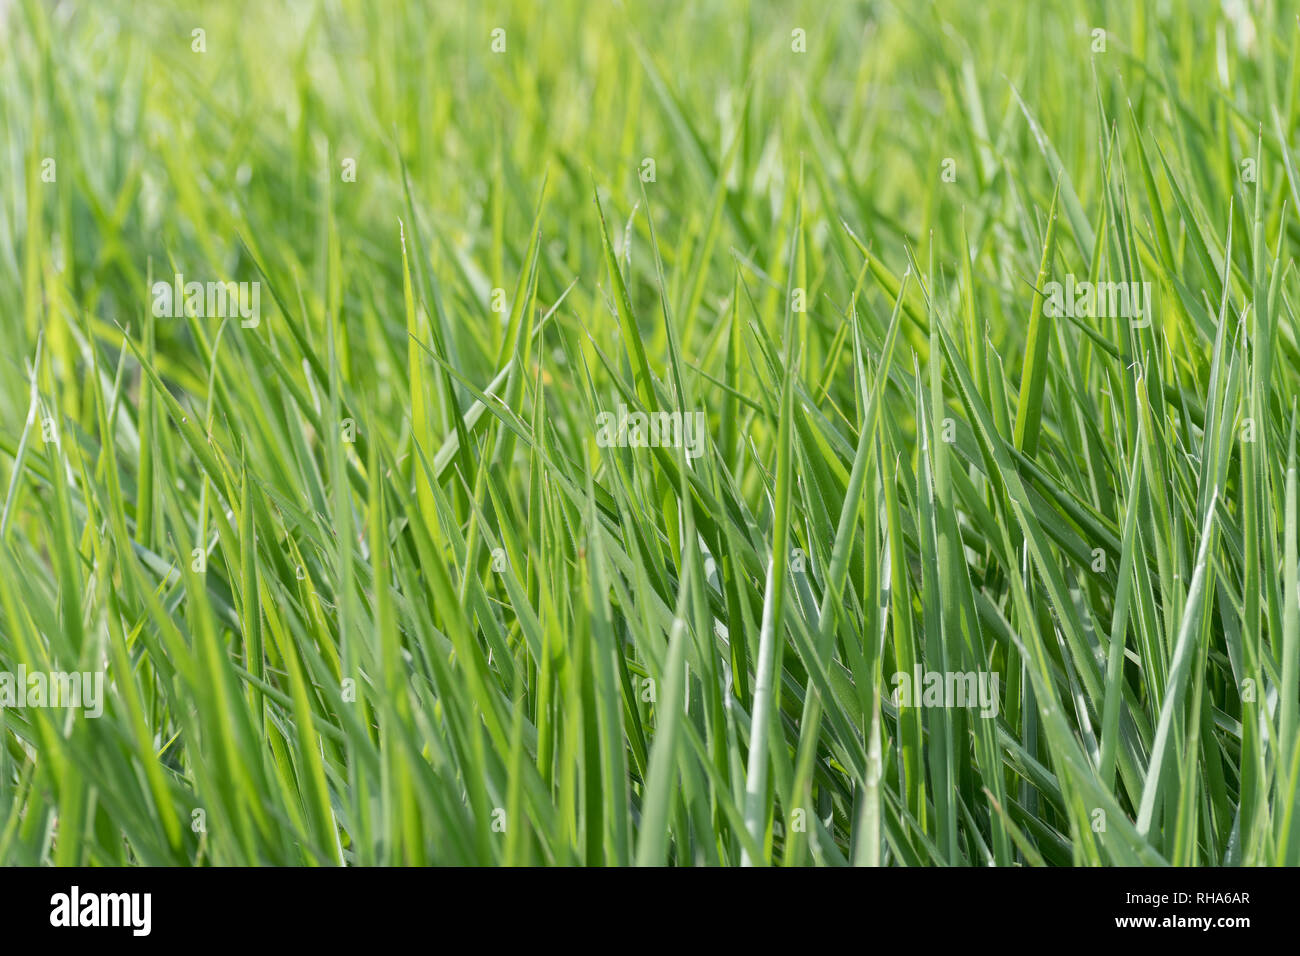 Blades of tall lush healthy green grass growing in a field. Grass only. Natural abstract patterns. Stock Photo